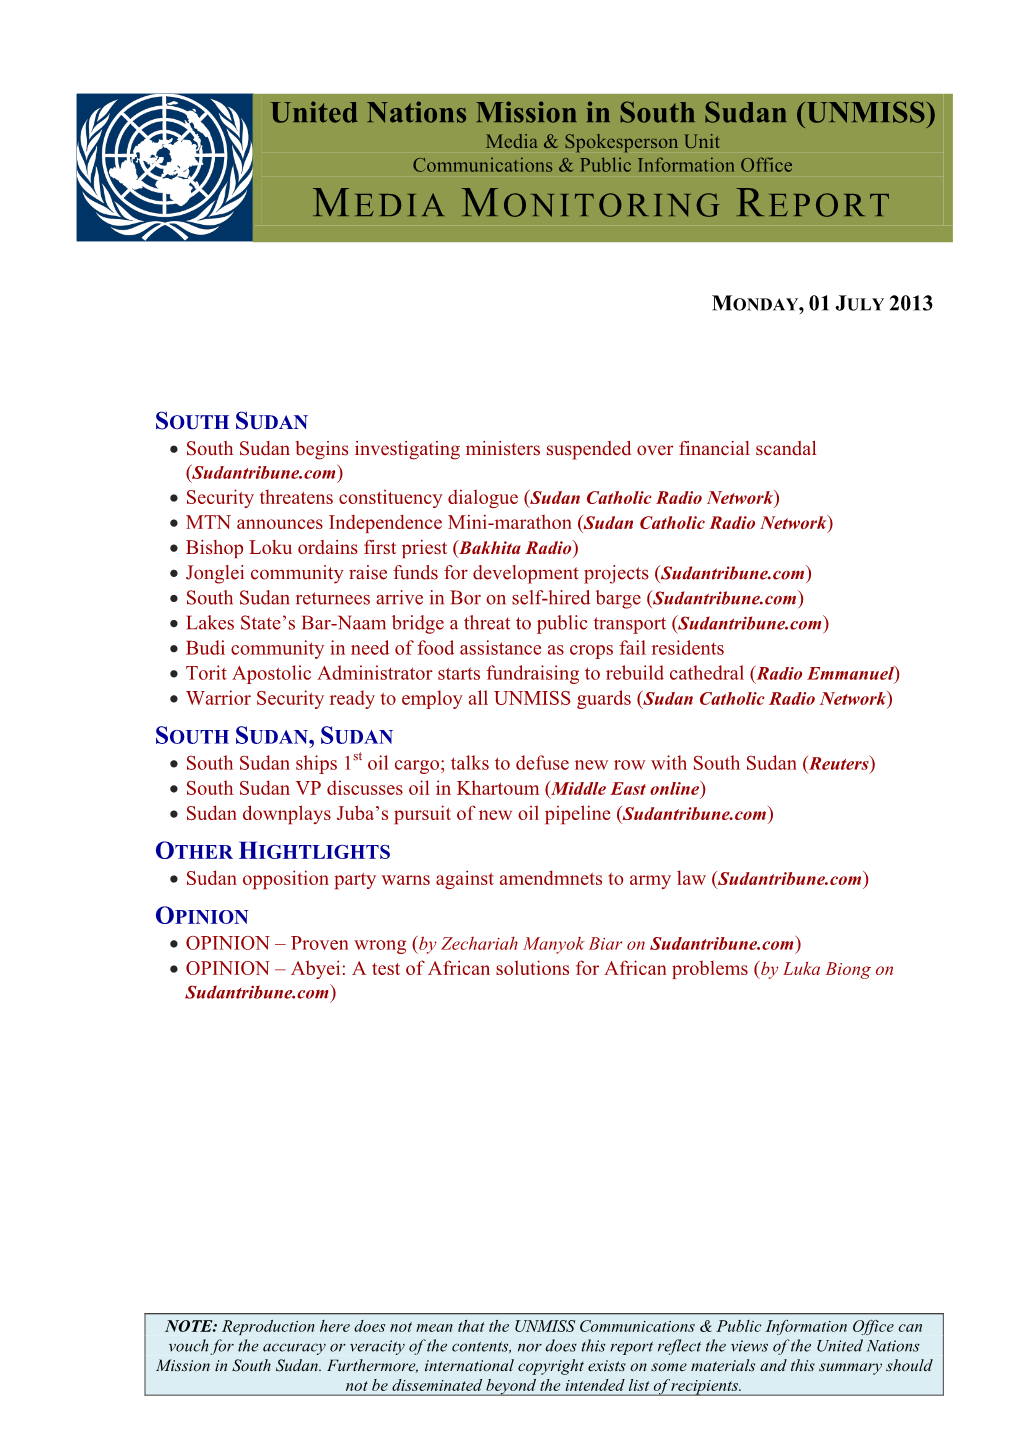 United Nations Mission in South Sudan (UNMISS) Media & Spokesperson Unit Communications & Public Information Office MEDIA MONITORING REPORT